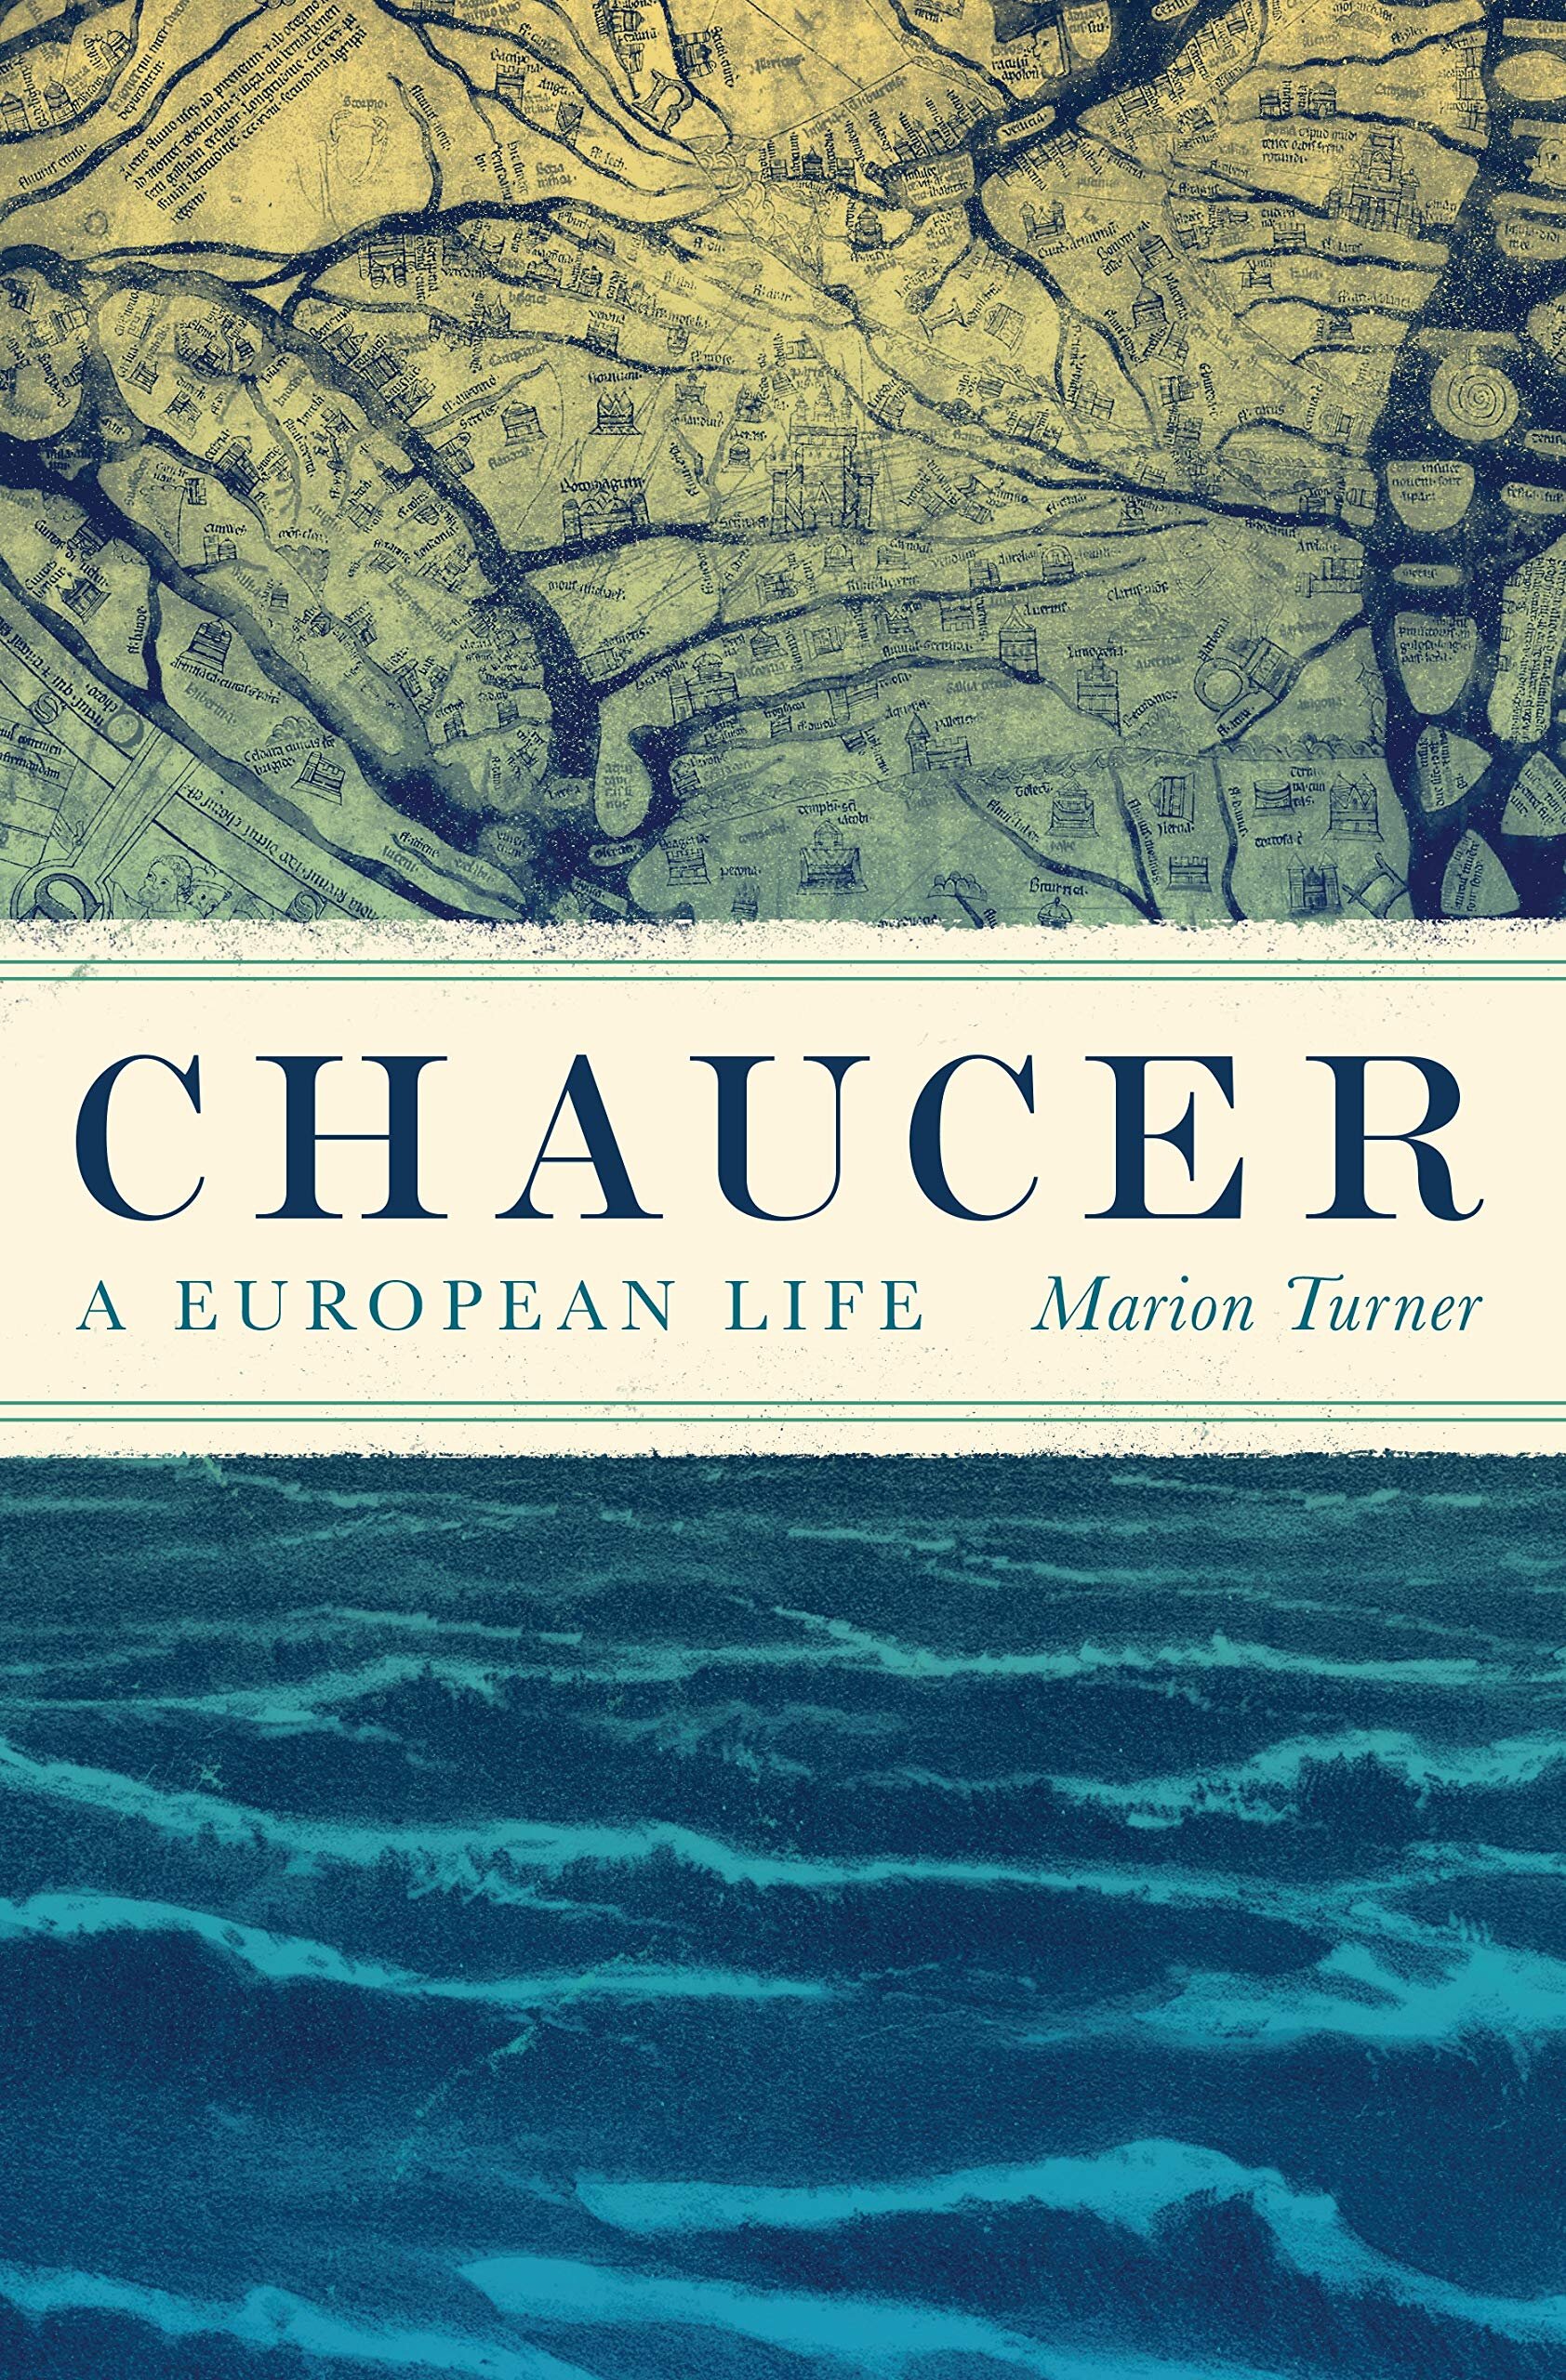 Biography Chaucer A European Life by Marion Turner.jpg